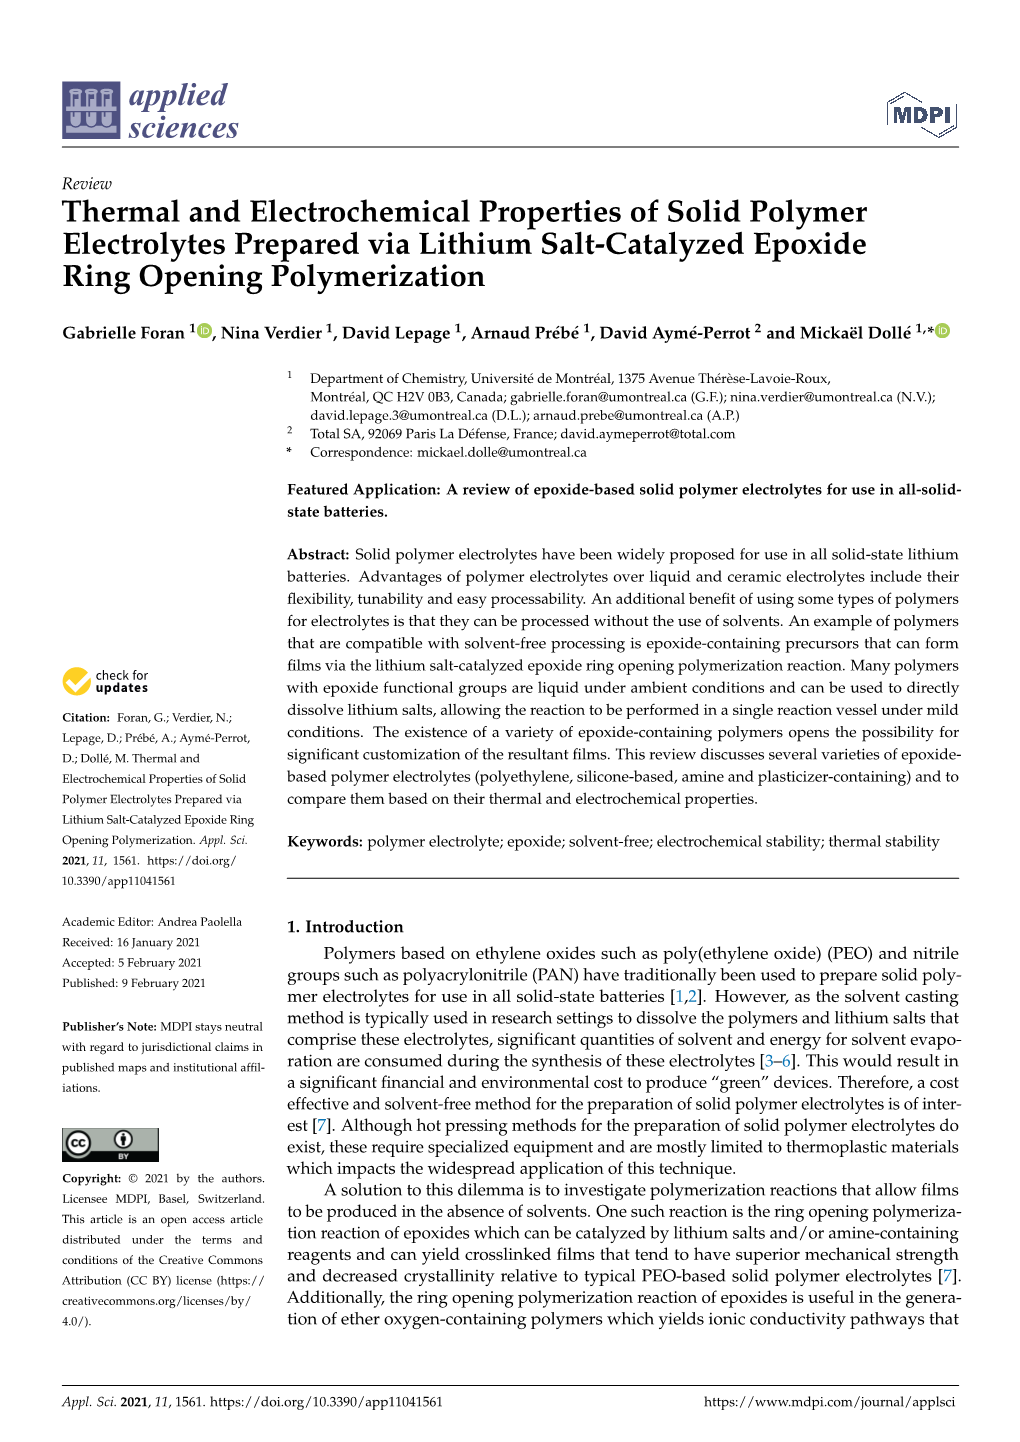 Thermal and Electrochemical Properties of Solid Polymer Electrolytes Prepared Via Lithium Salt-Catalyzed Epoxide Ring Opening Polymerization